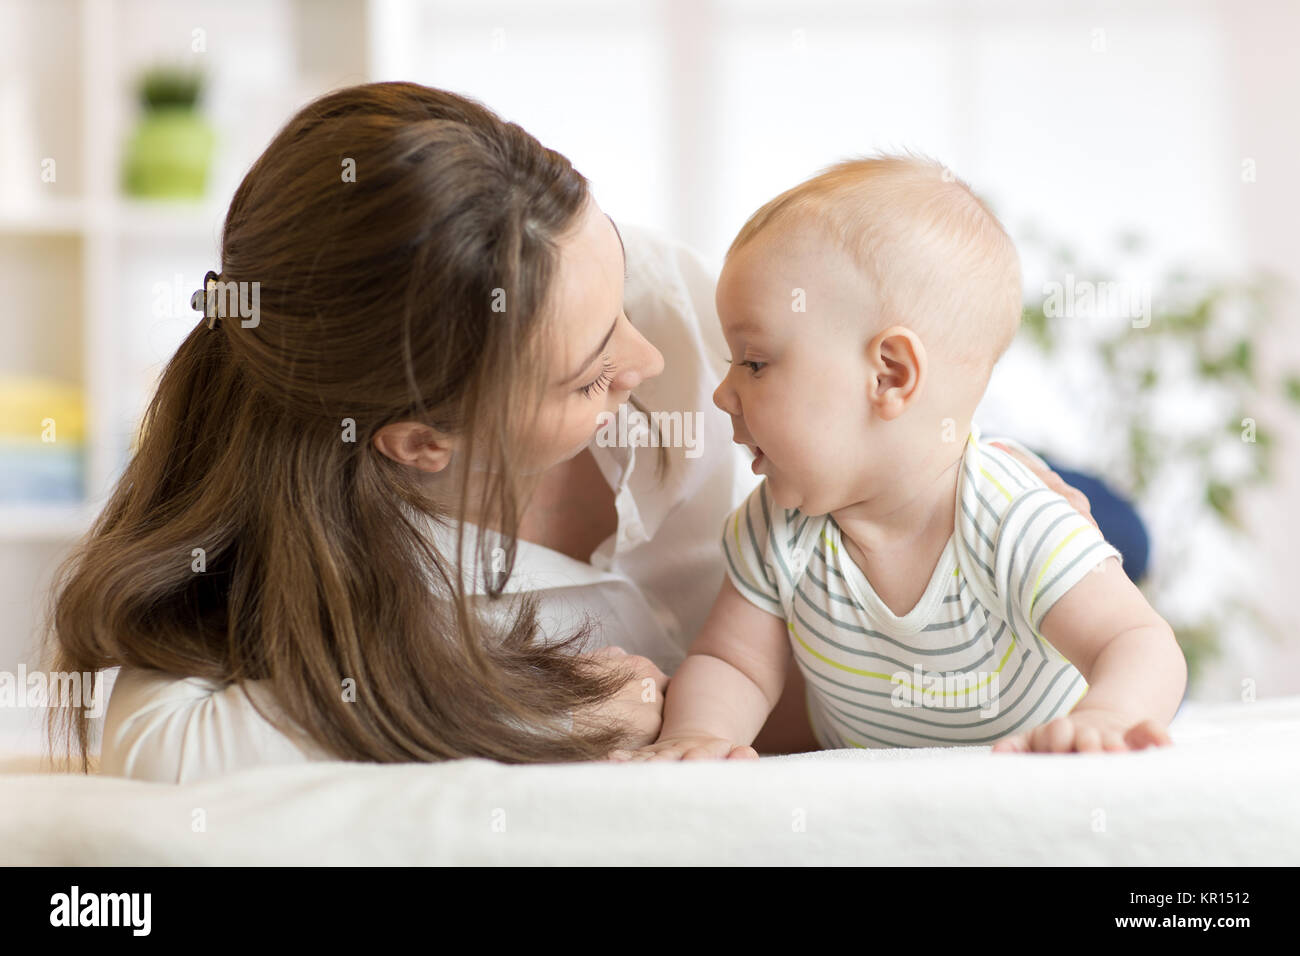 Mommy loving newborn child. Mother communicates with her baby. Stock Photo